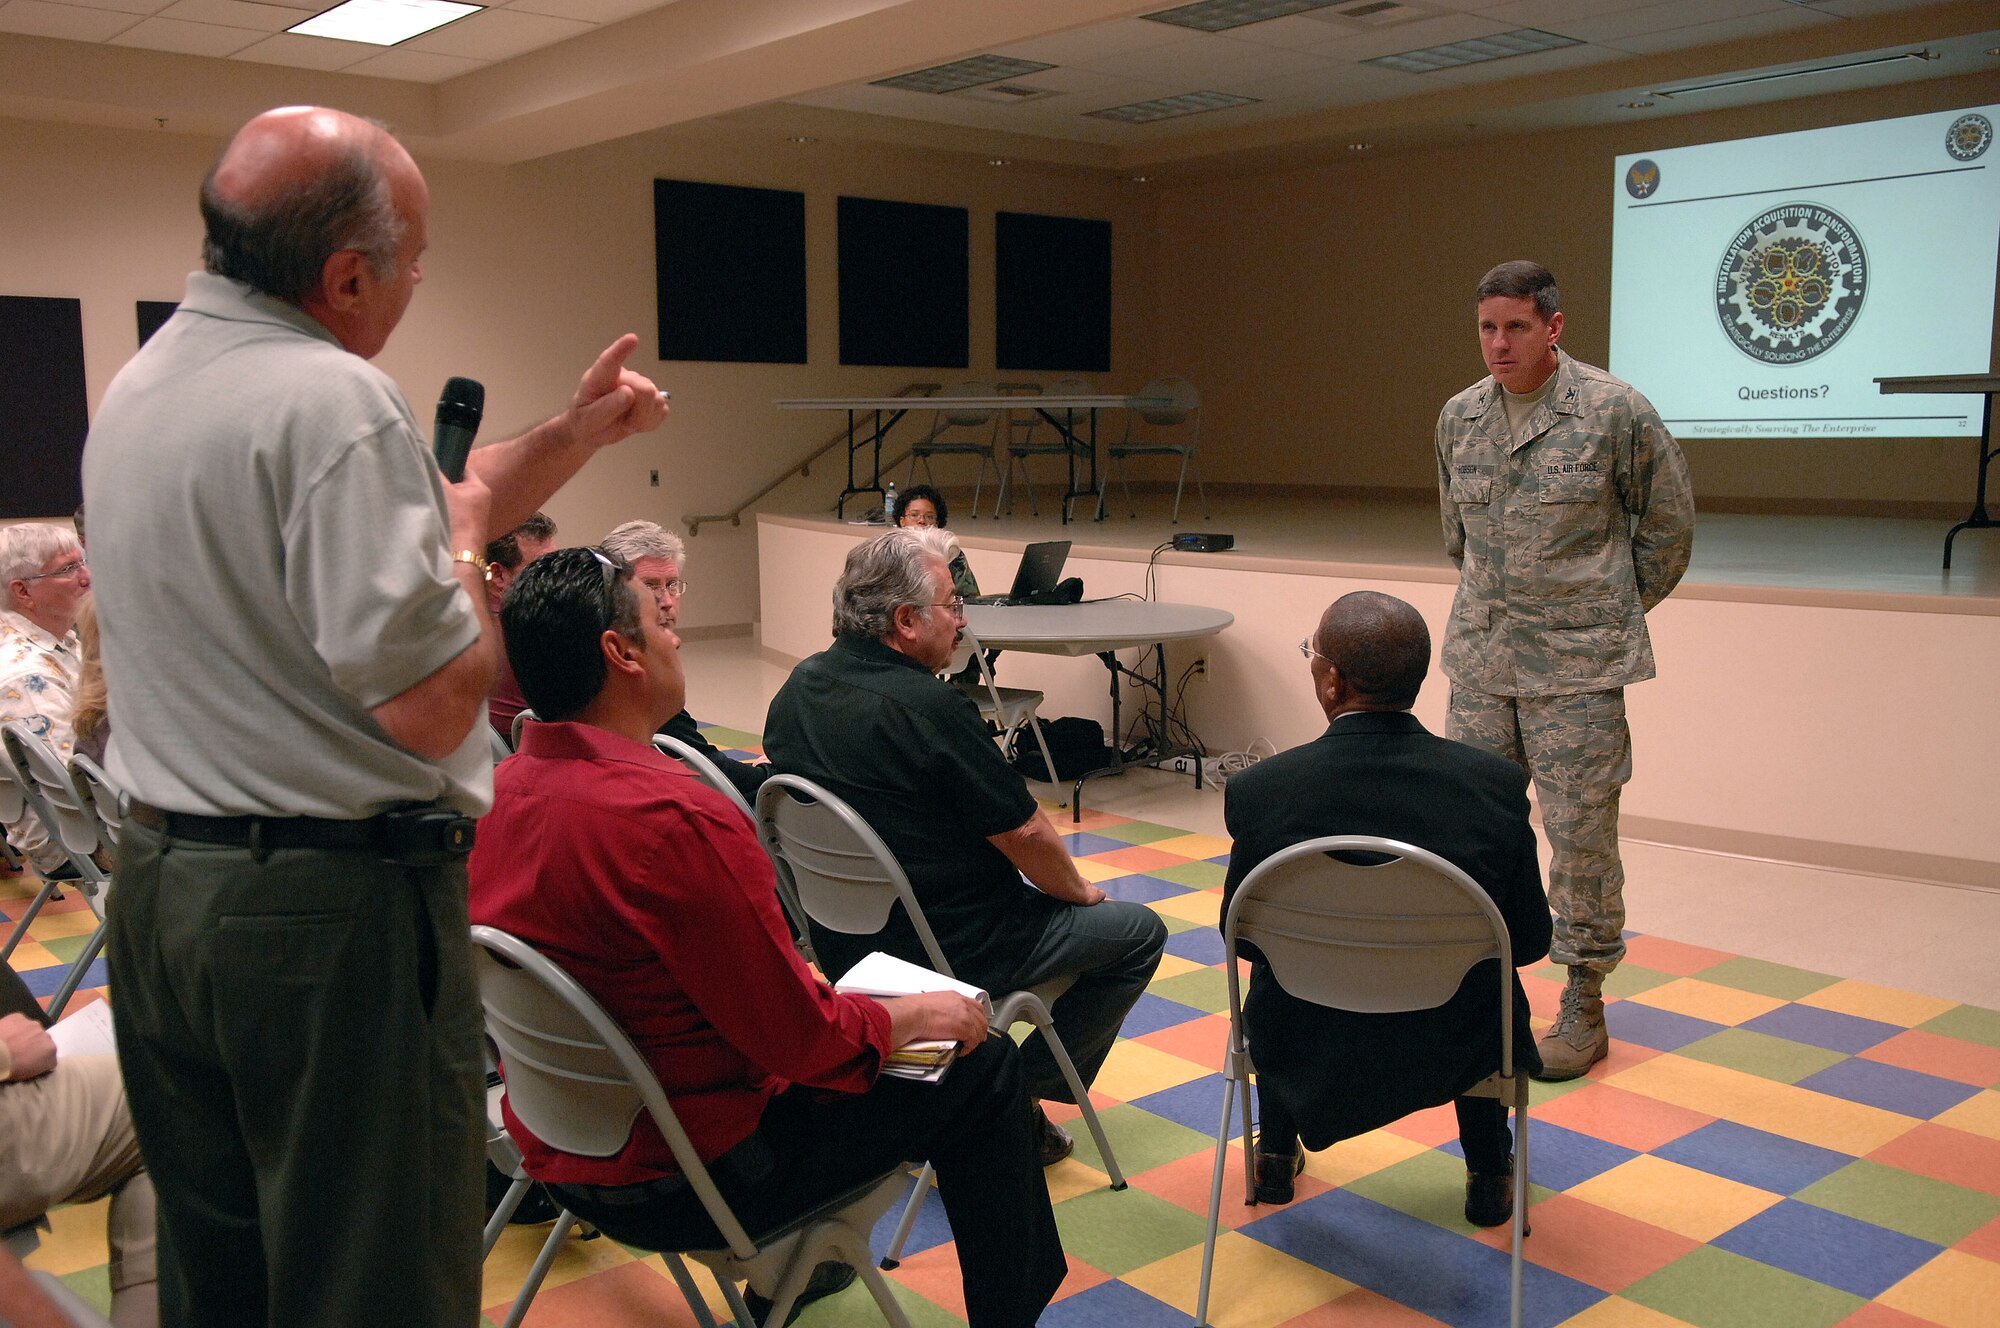 Col. Mark Hobson, Headquarters Air Force Materiel Command Directorate of Contracting Resource Management Division chief, takes a question from a  local business owner about the upcoming Installation Acquisition Transformation and how it will affect the way he and others do business with Nellis Air Force Base during a town hall meeting at the Dr. William C. Pearson Community Center in Las Vegas, Nev., July 14, 2008.  Col. Hobson explained how the transformation would occur and then took questions from the audience regarding their concerns over the changes.  (U.S. Air Force photo / Senior Airman Kasabyan D. Musal)
